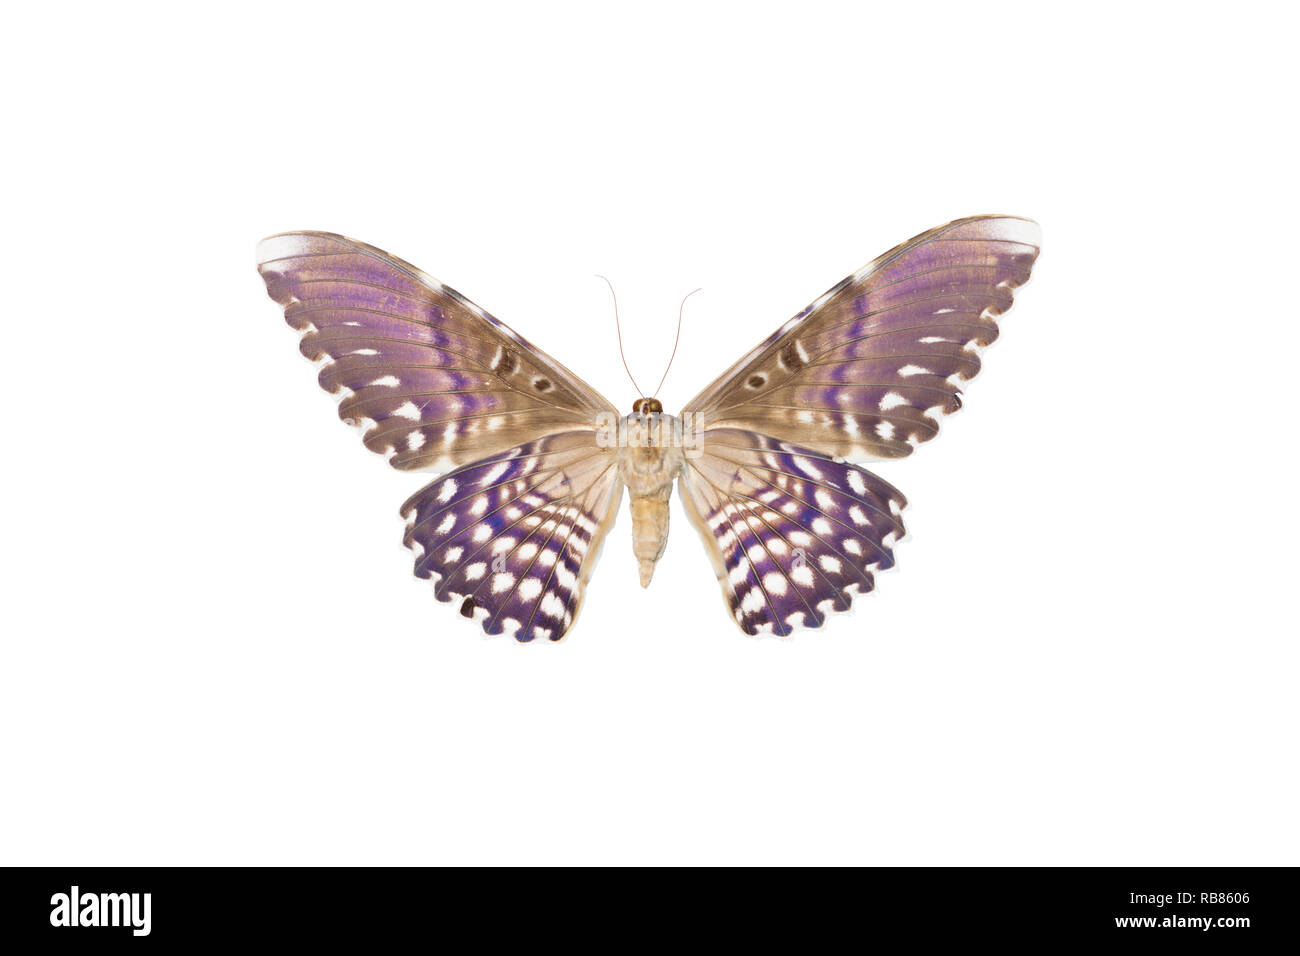 A beautiful photo of ventral view of the biggest moth in the world - The white witch aka birdwing moth (Thysania agrippina). Stock Photo